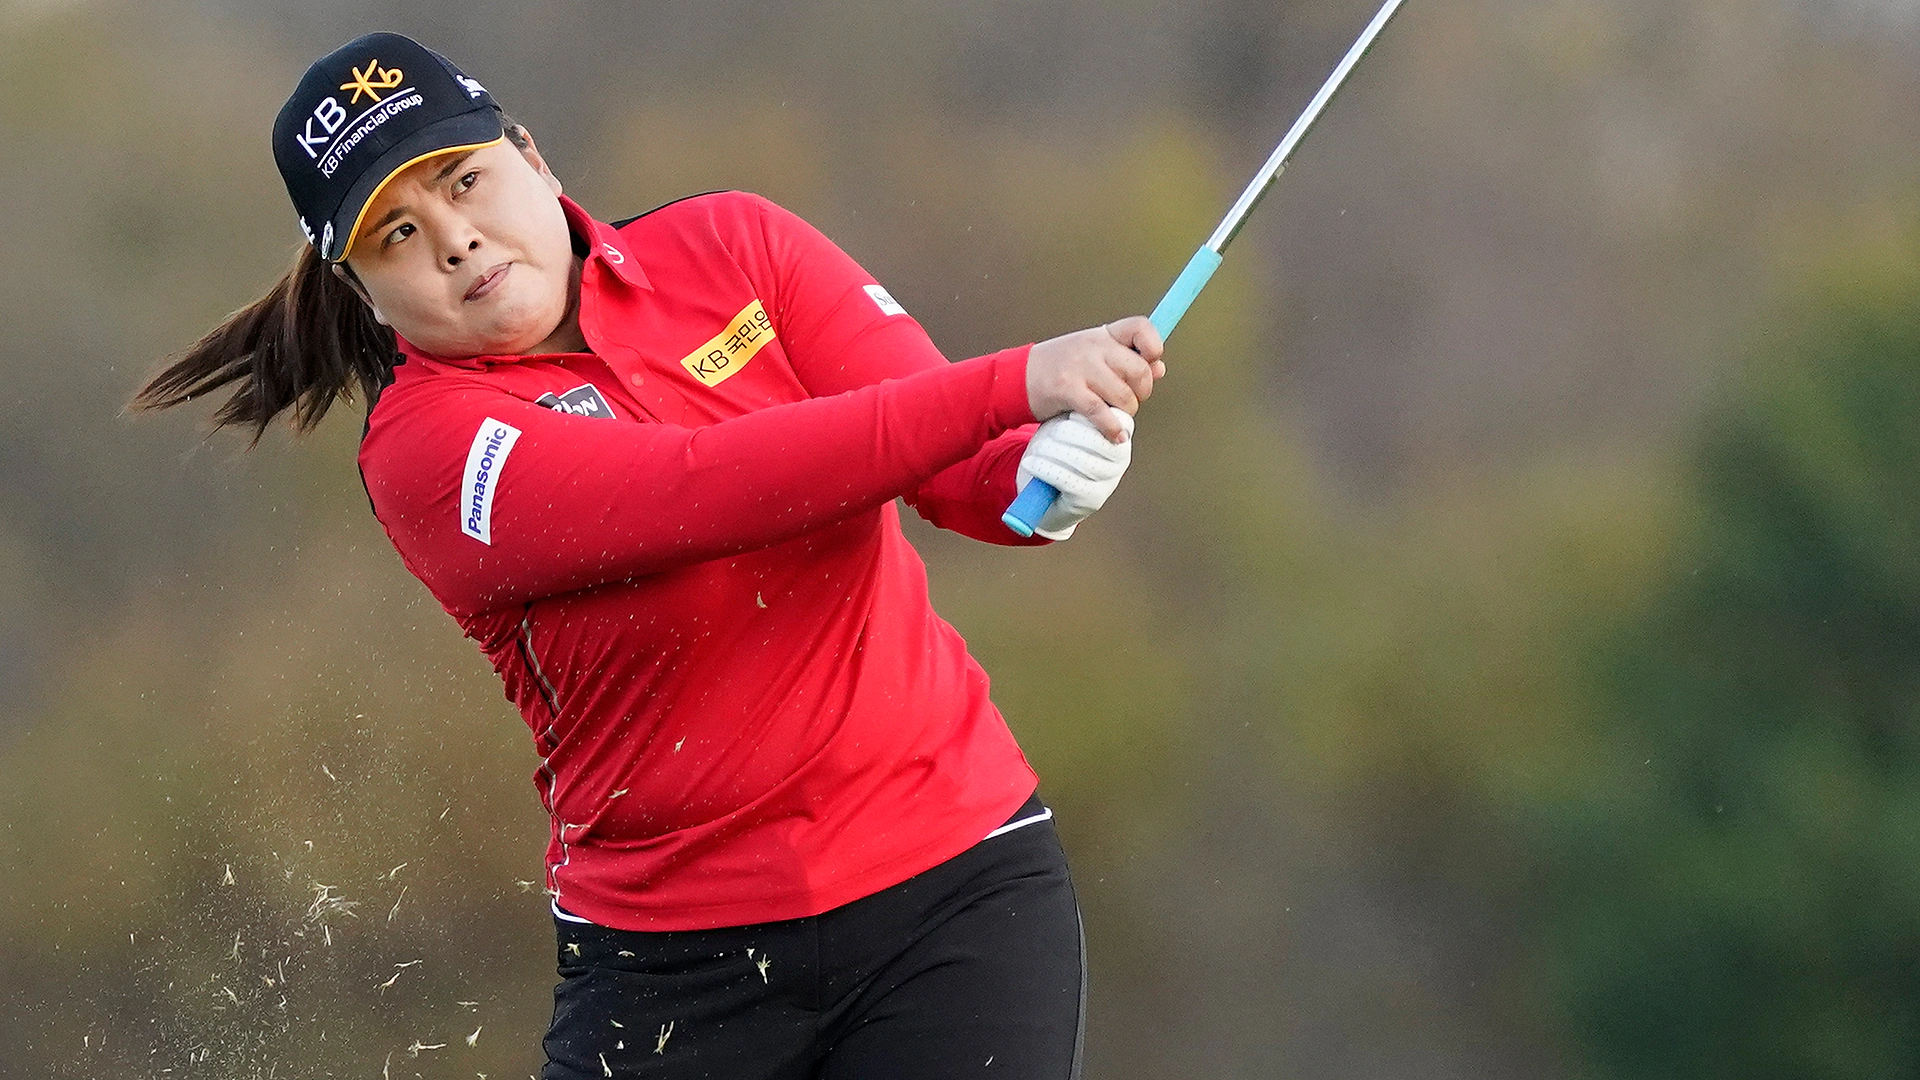 Inbee Park part of three-way VOA lead after Yealimi Noh doubles last hole